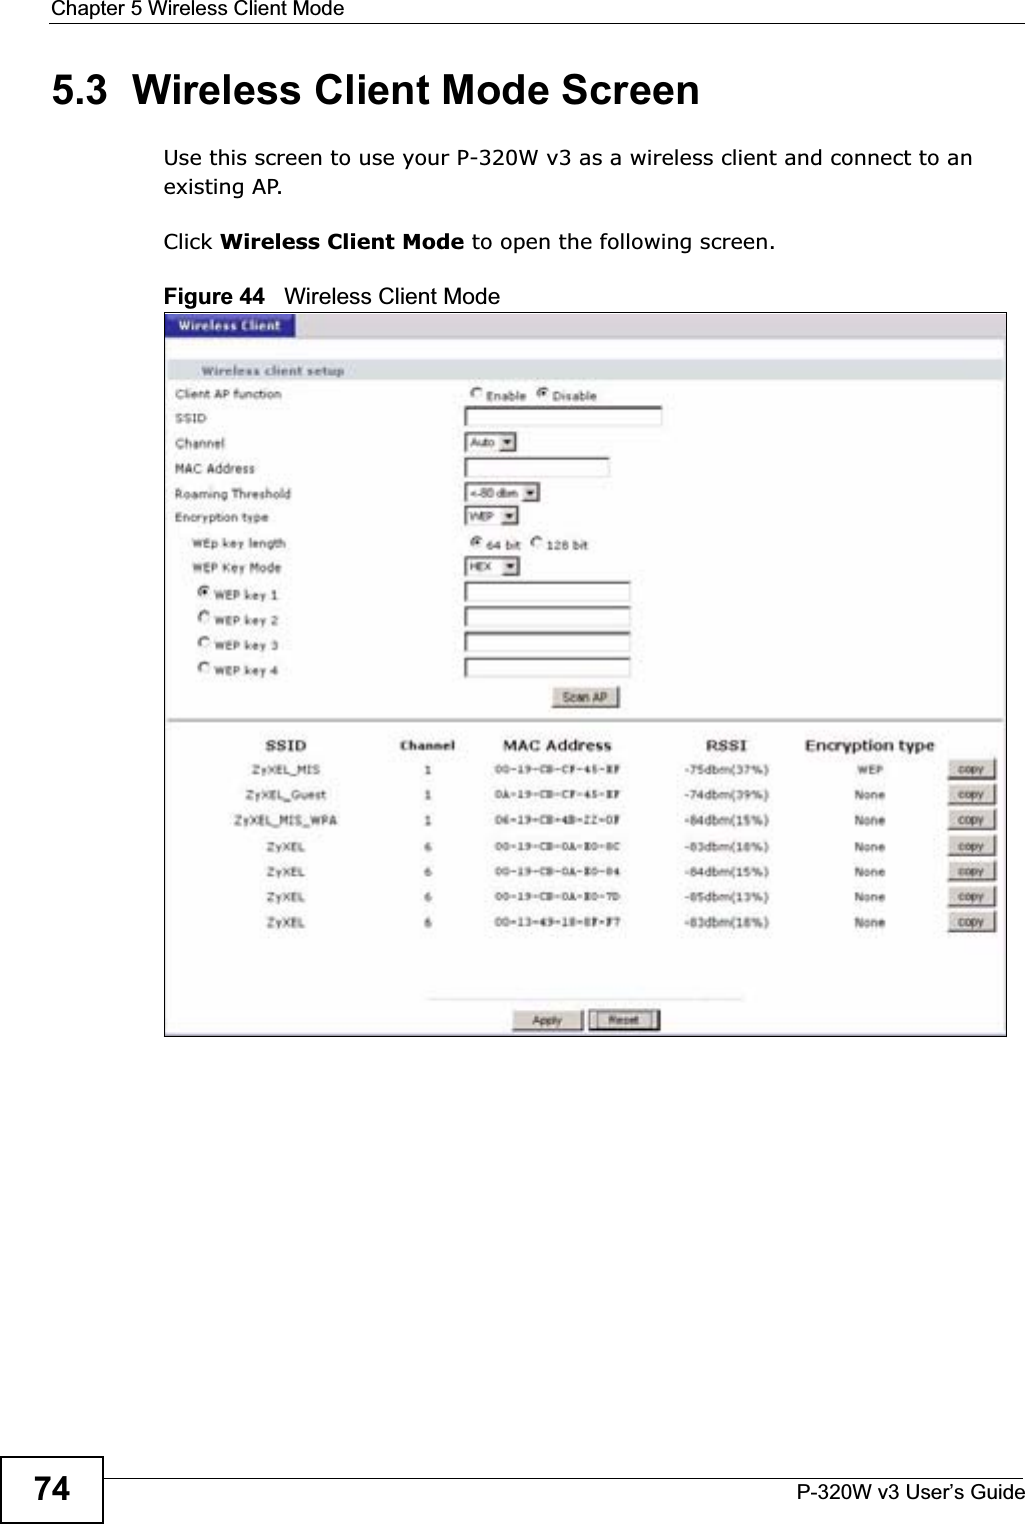 Chapter 5 Wireless Client ModeP-320W v3 User’s Guide745.3  Wireless Client Mode ScreenUse this screen to use your P-320W v3 as a wireless client and connect to an existing AP.Click Wireless Client Mode to open the following screen.Figure 44   Wireless Client Mode